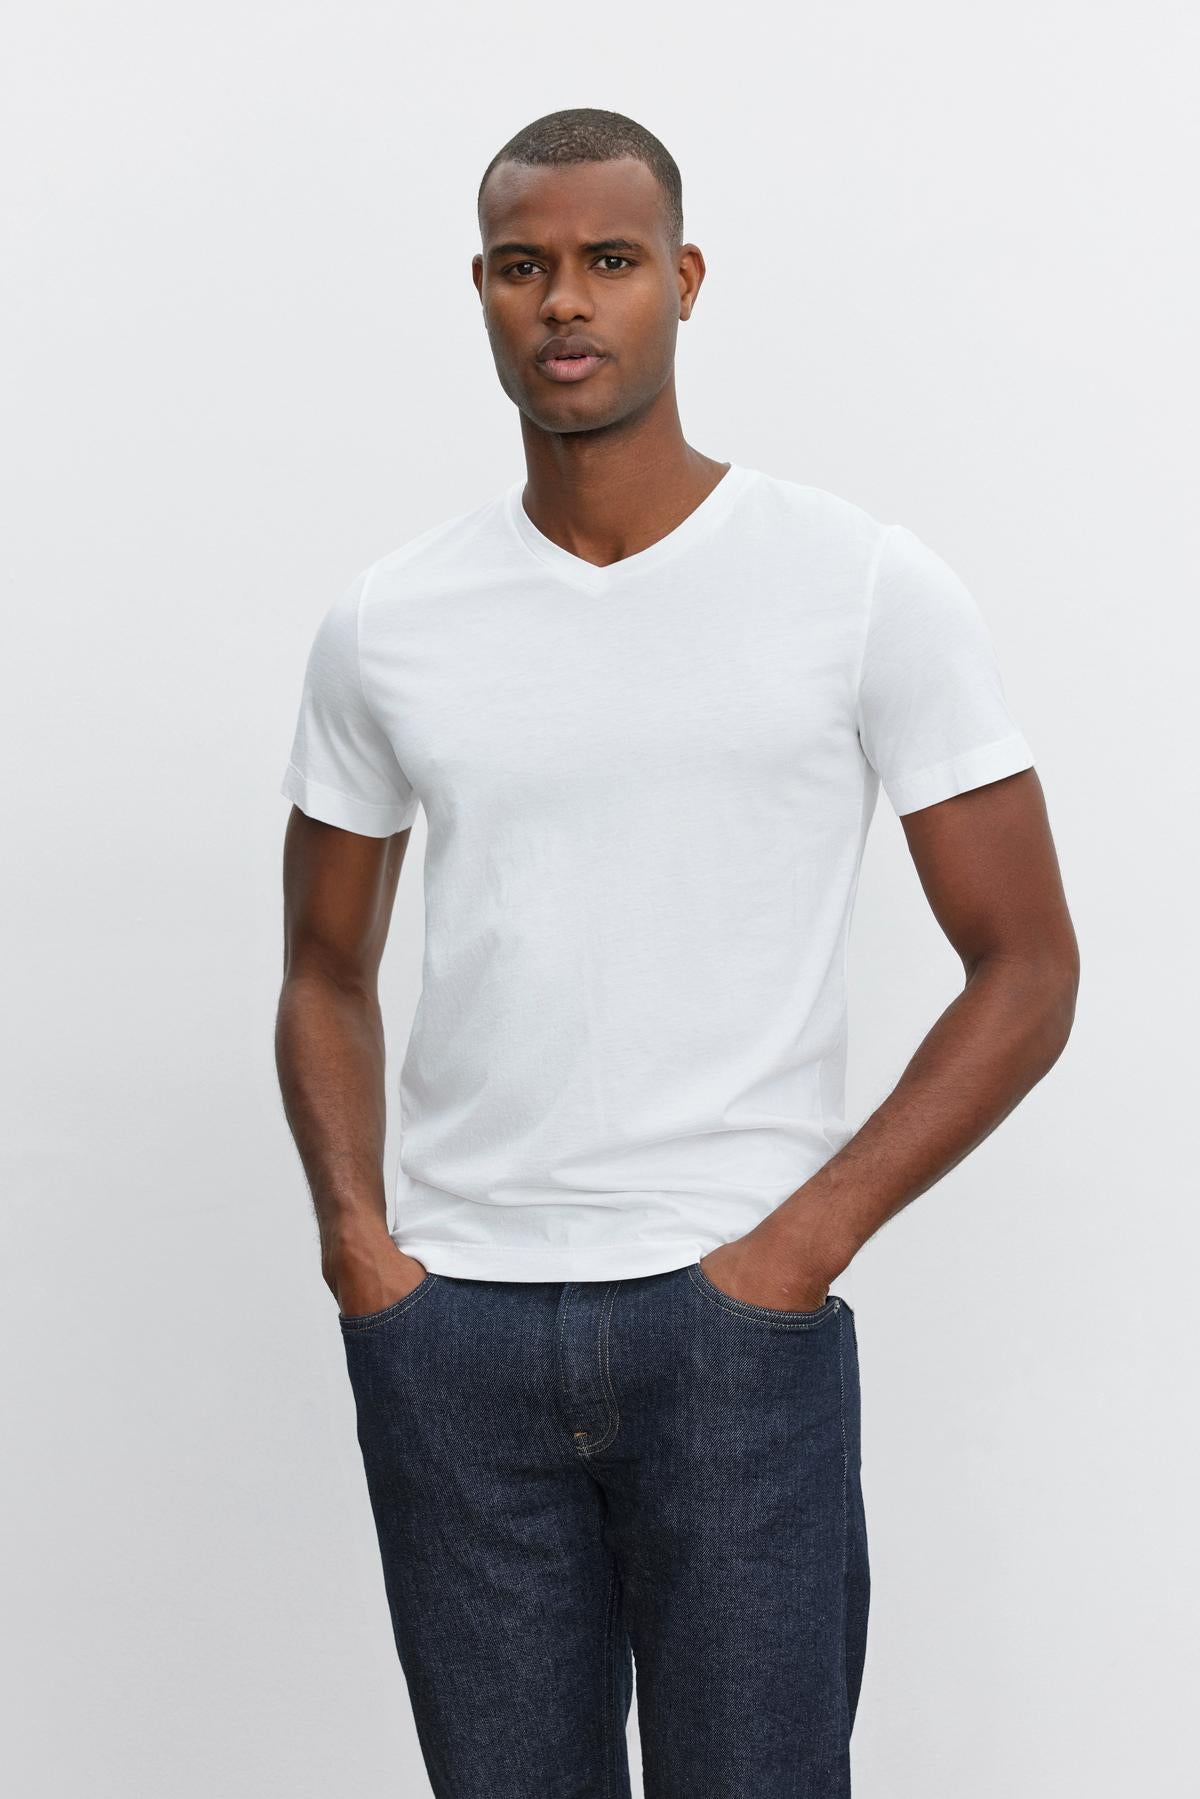 A man wearing a Velvet by Graham & Spencer SAMSEN WHISPER CLASSIC V-NECK TEE and jeans with a whisper knit fabric.-35867445985473